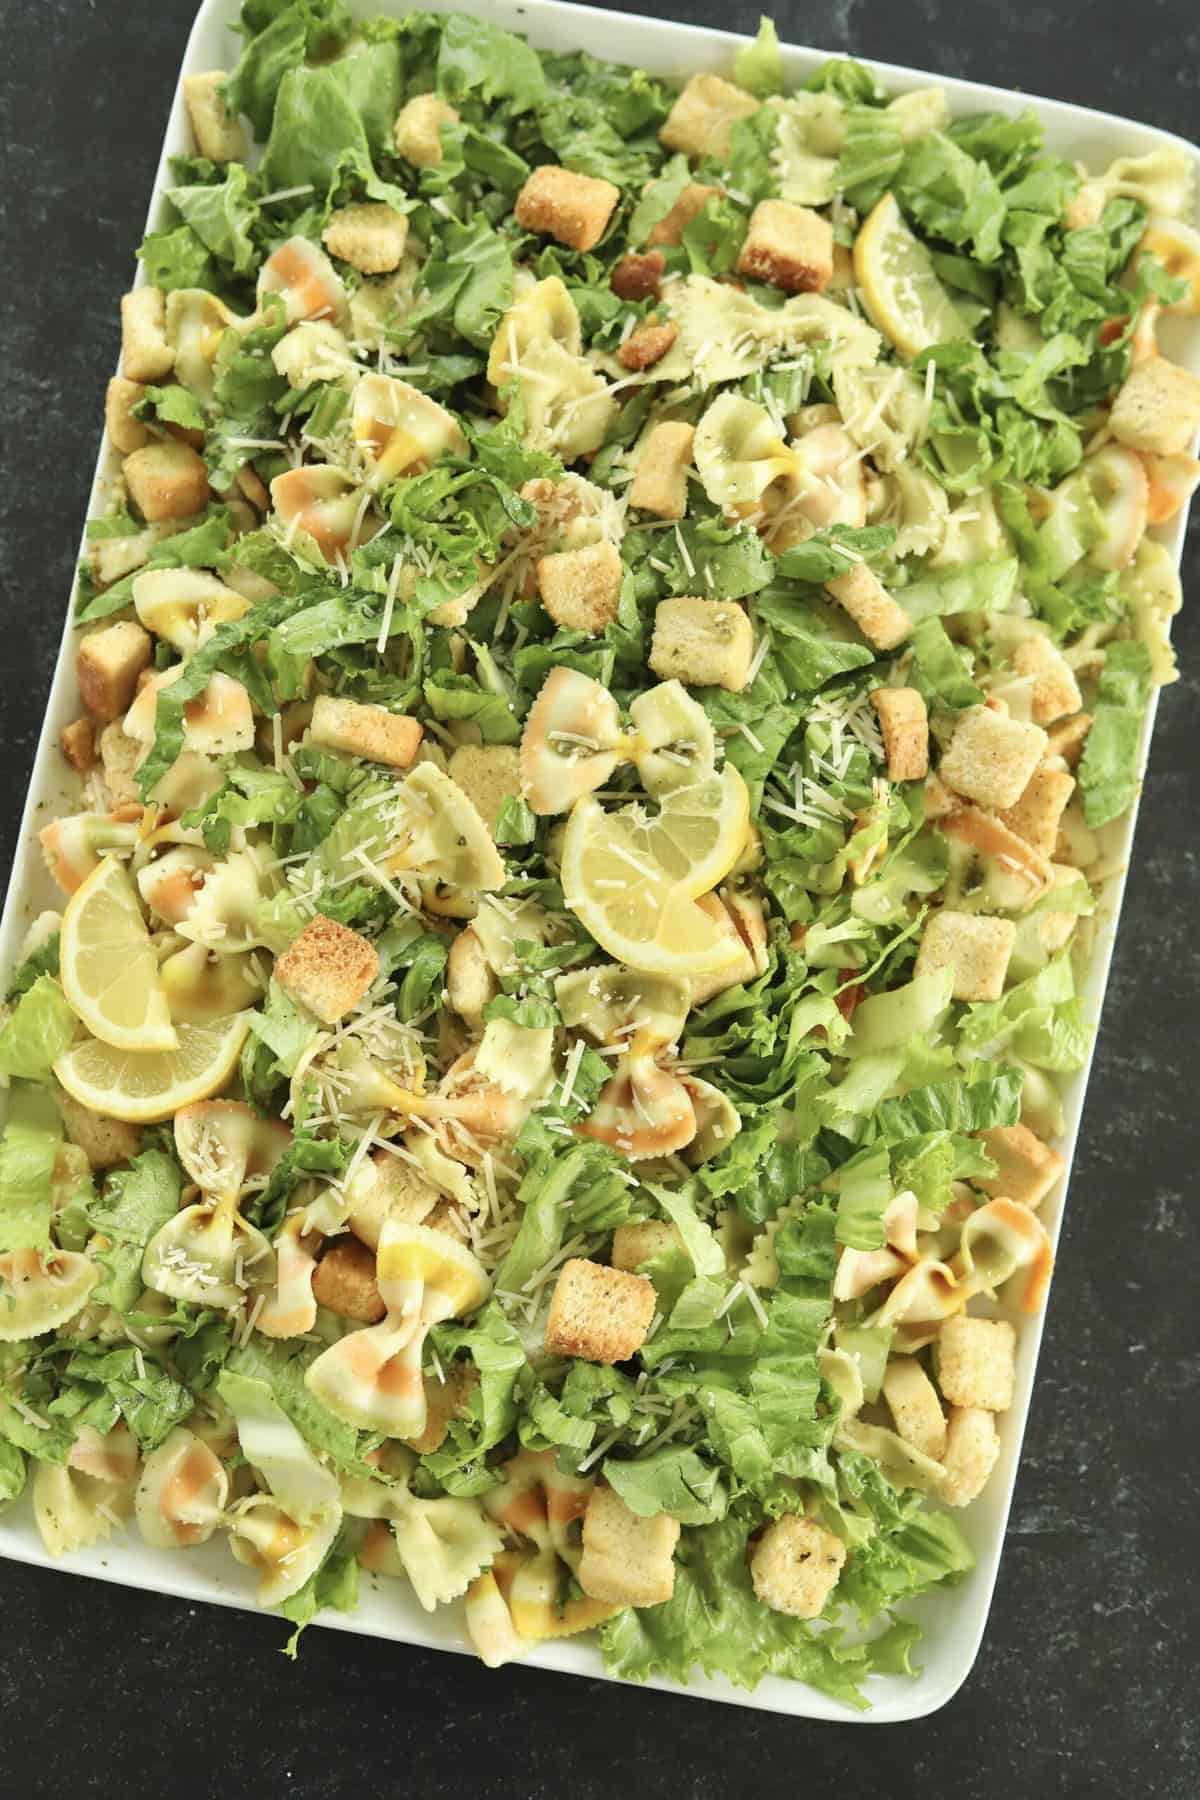 overhead image of a white serving platter full of pesto pasta salad made with lettuce, noodles, croutons, and Parmesan